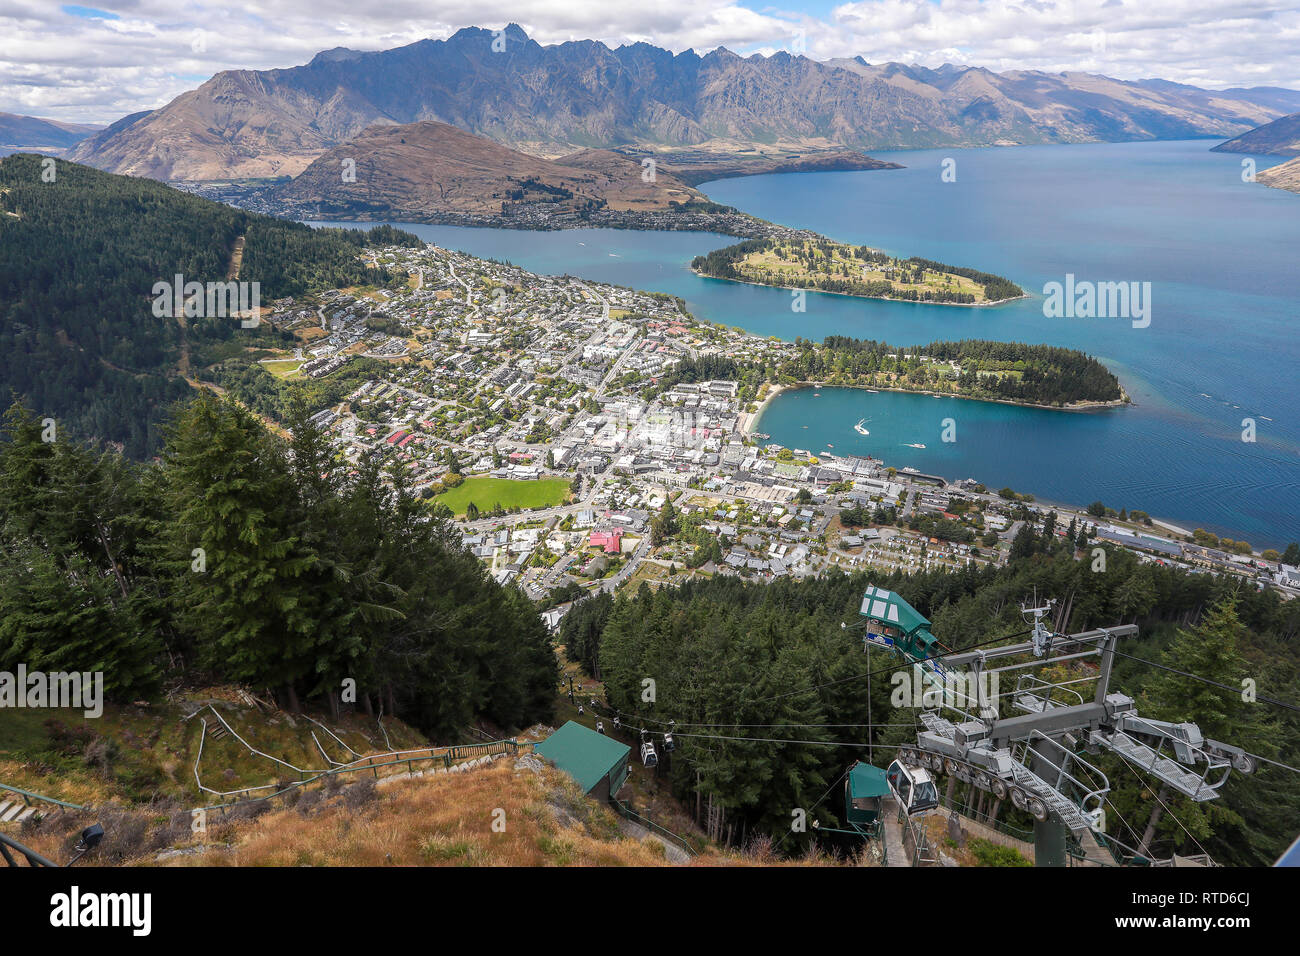 Queenstown and Lake Wakatipu from the restaurant on Ben Lomond mountain Skyline gondola.The Remarkables in background. New Zealand South Island Stock Photo